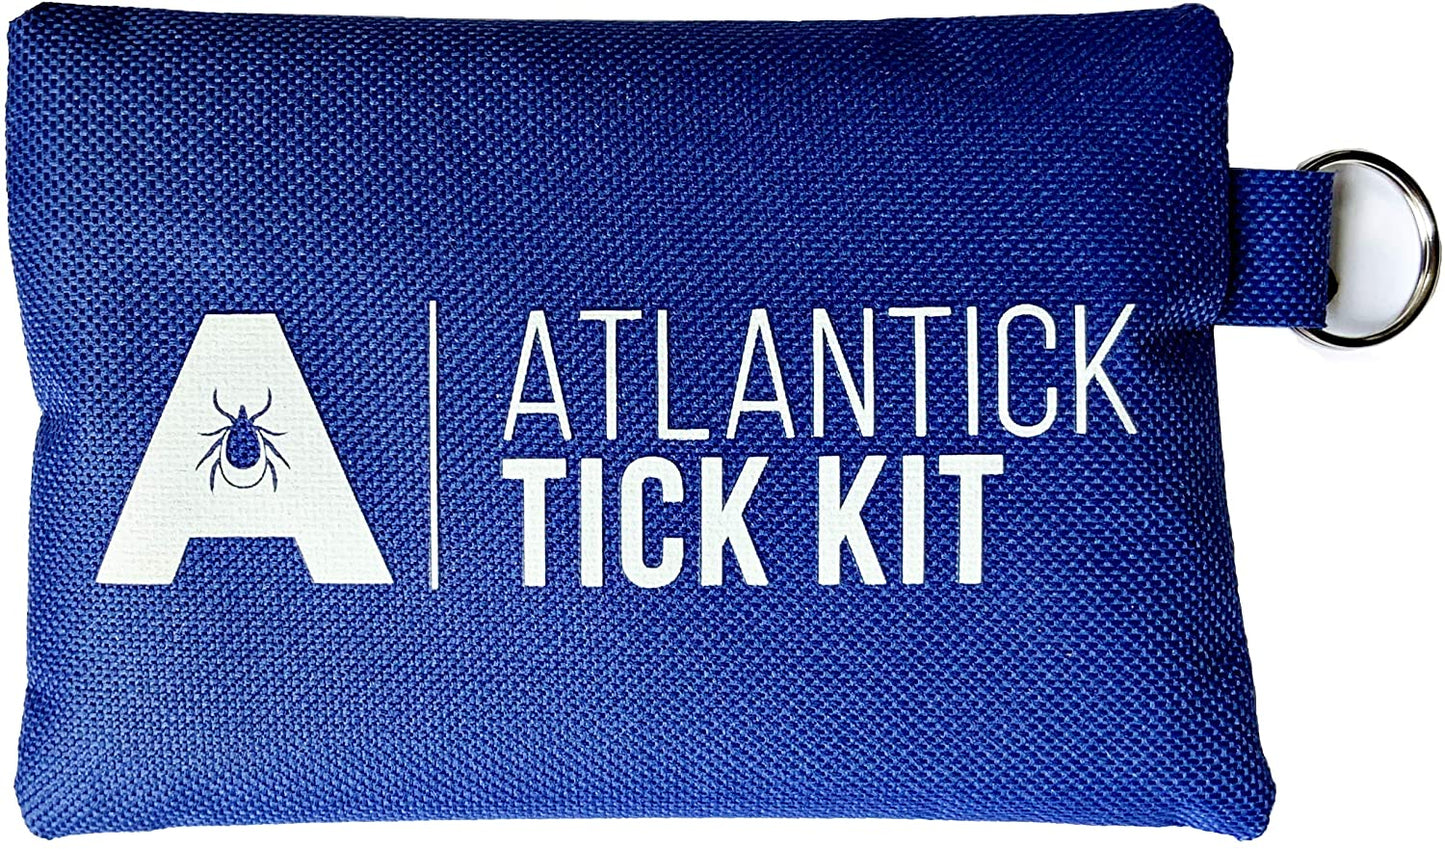 Atlantick Tick Kit - Tick Removal Tools and First Aid Supplies